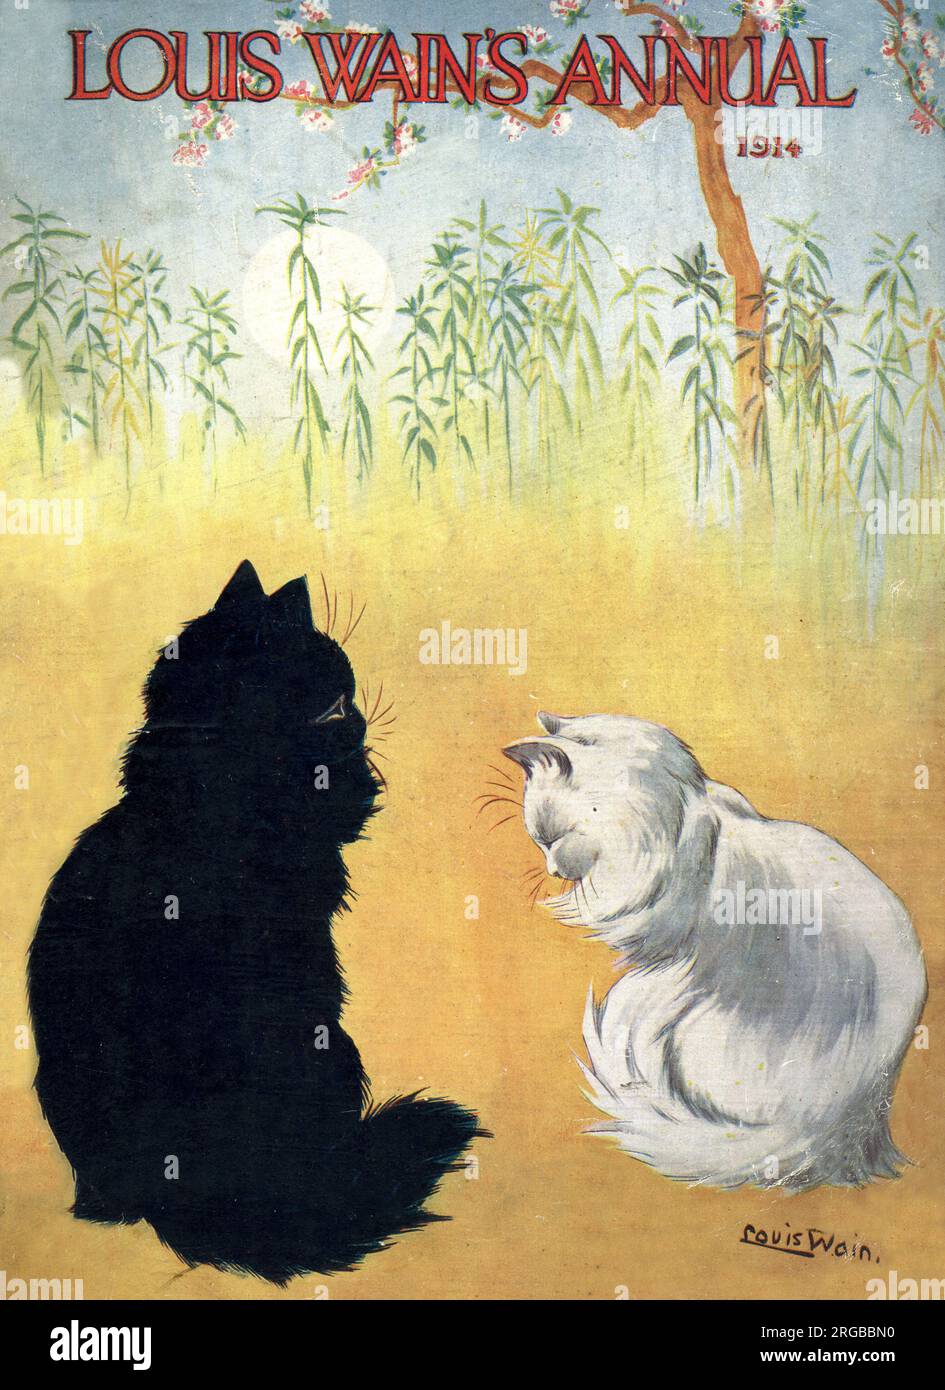 Cover design, Louis Wain's Annual 1914, with two cats, one black and one white Stock Photo